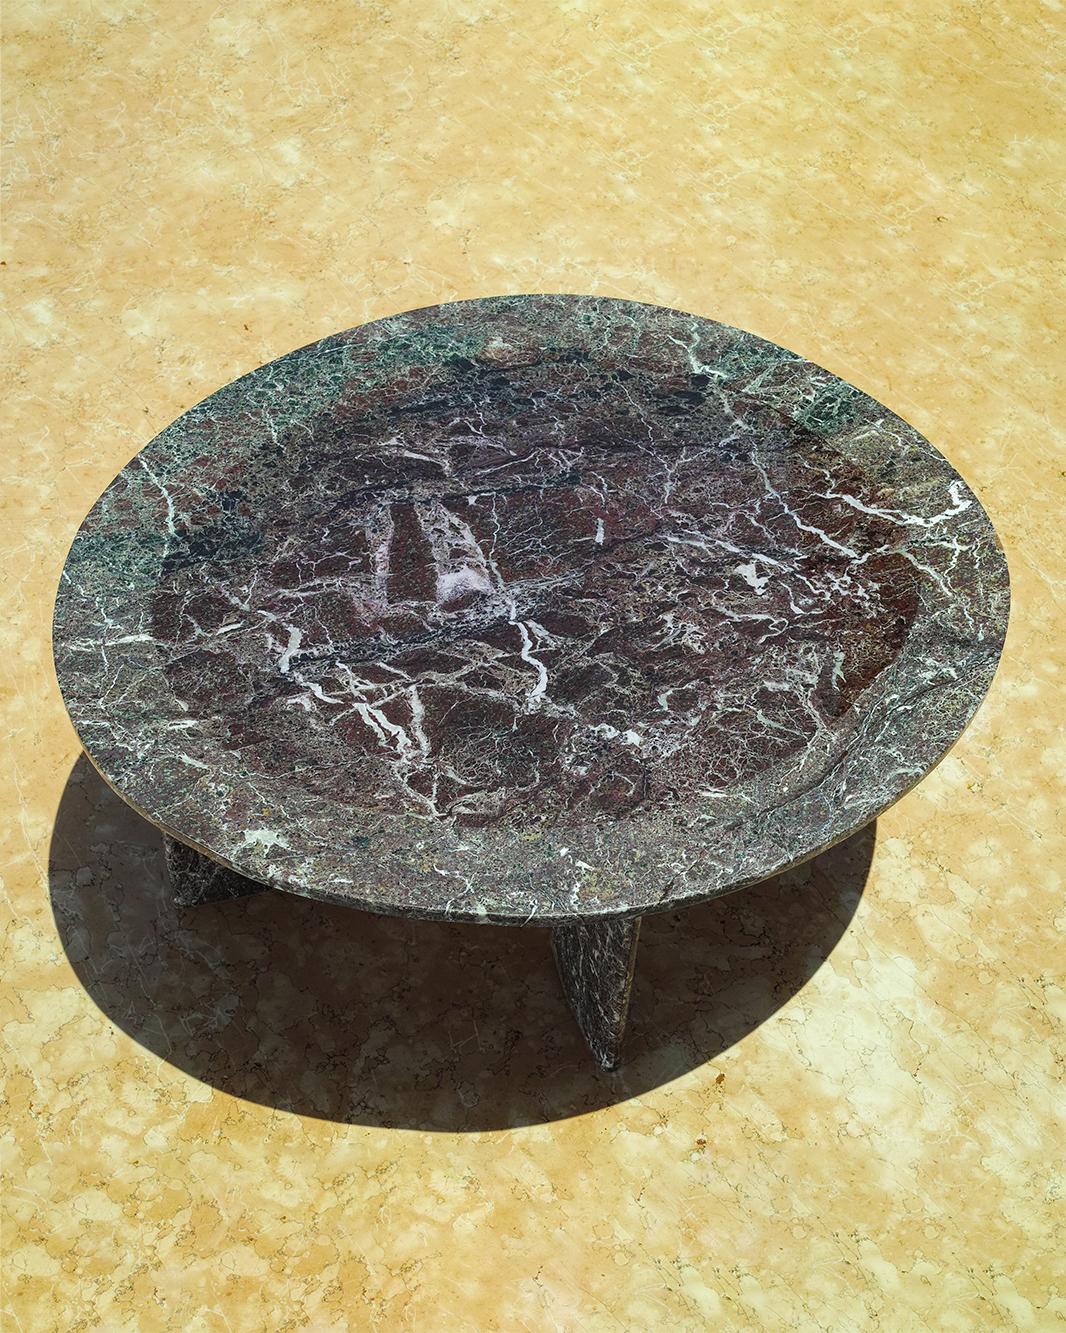 Minerals Purple Low Table by Carla Baz
Entirely handcrafted in solid marble with resin inlay.
Dimensions: L 136 x W 75 x H 35/45 CM
Weight: 65 kg
Material: Brescia Viola Marble, resin.
Also available in other shapes: round, rounded square.

The